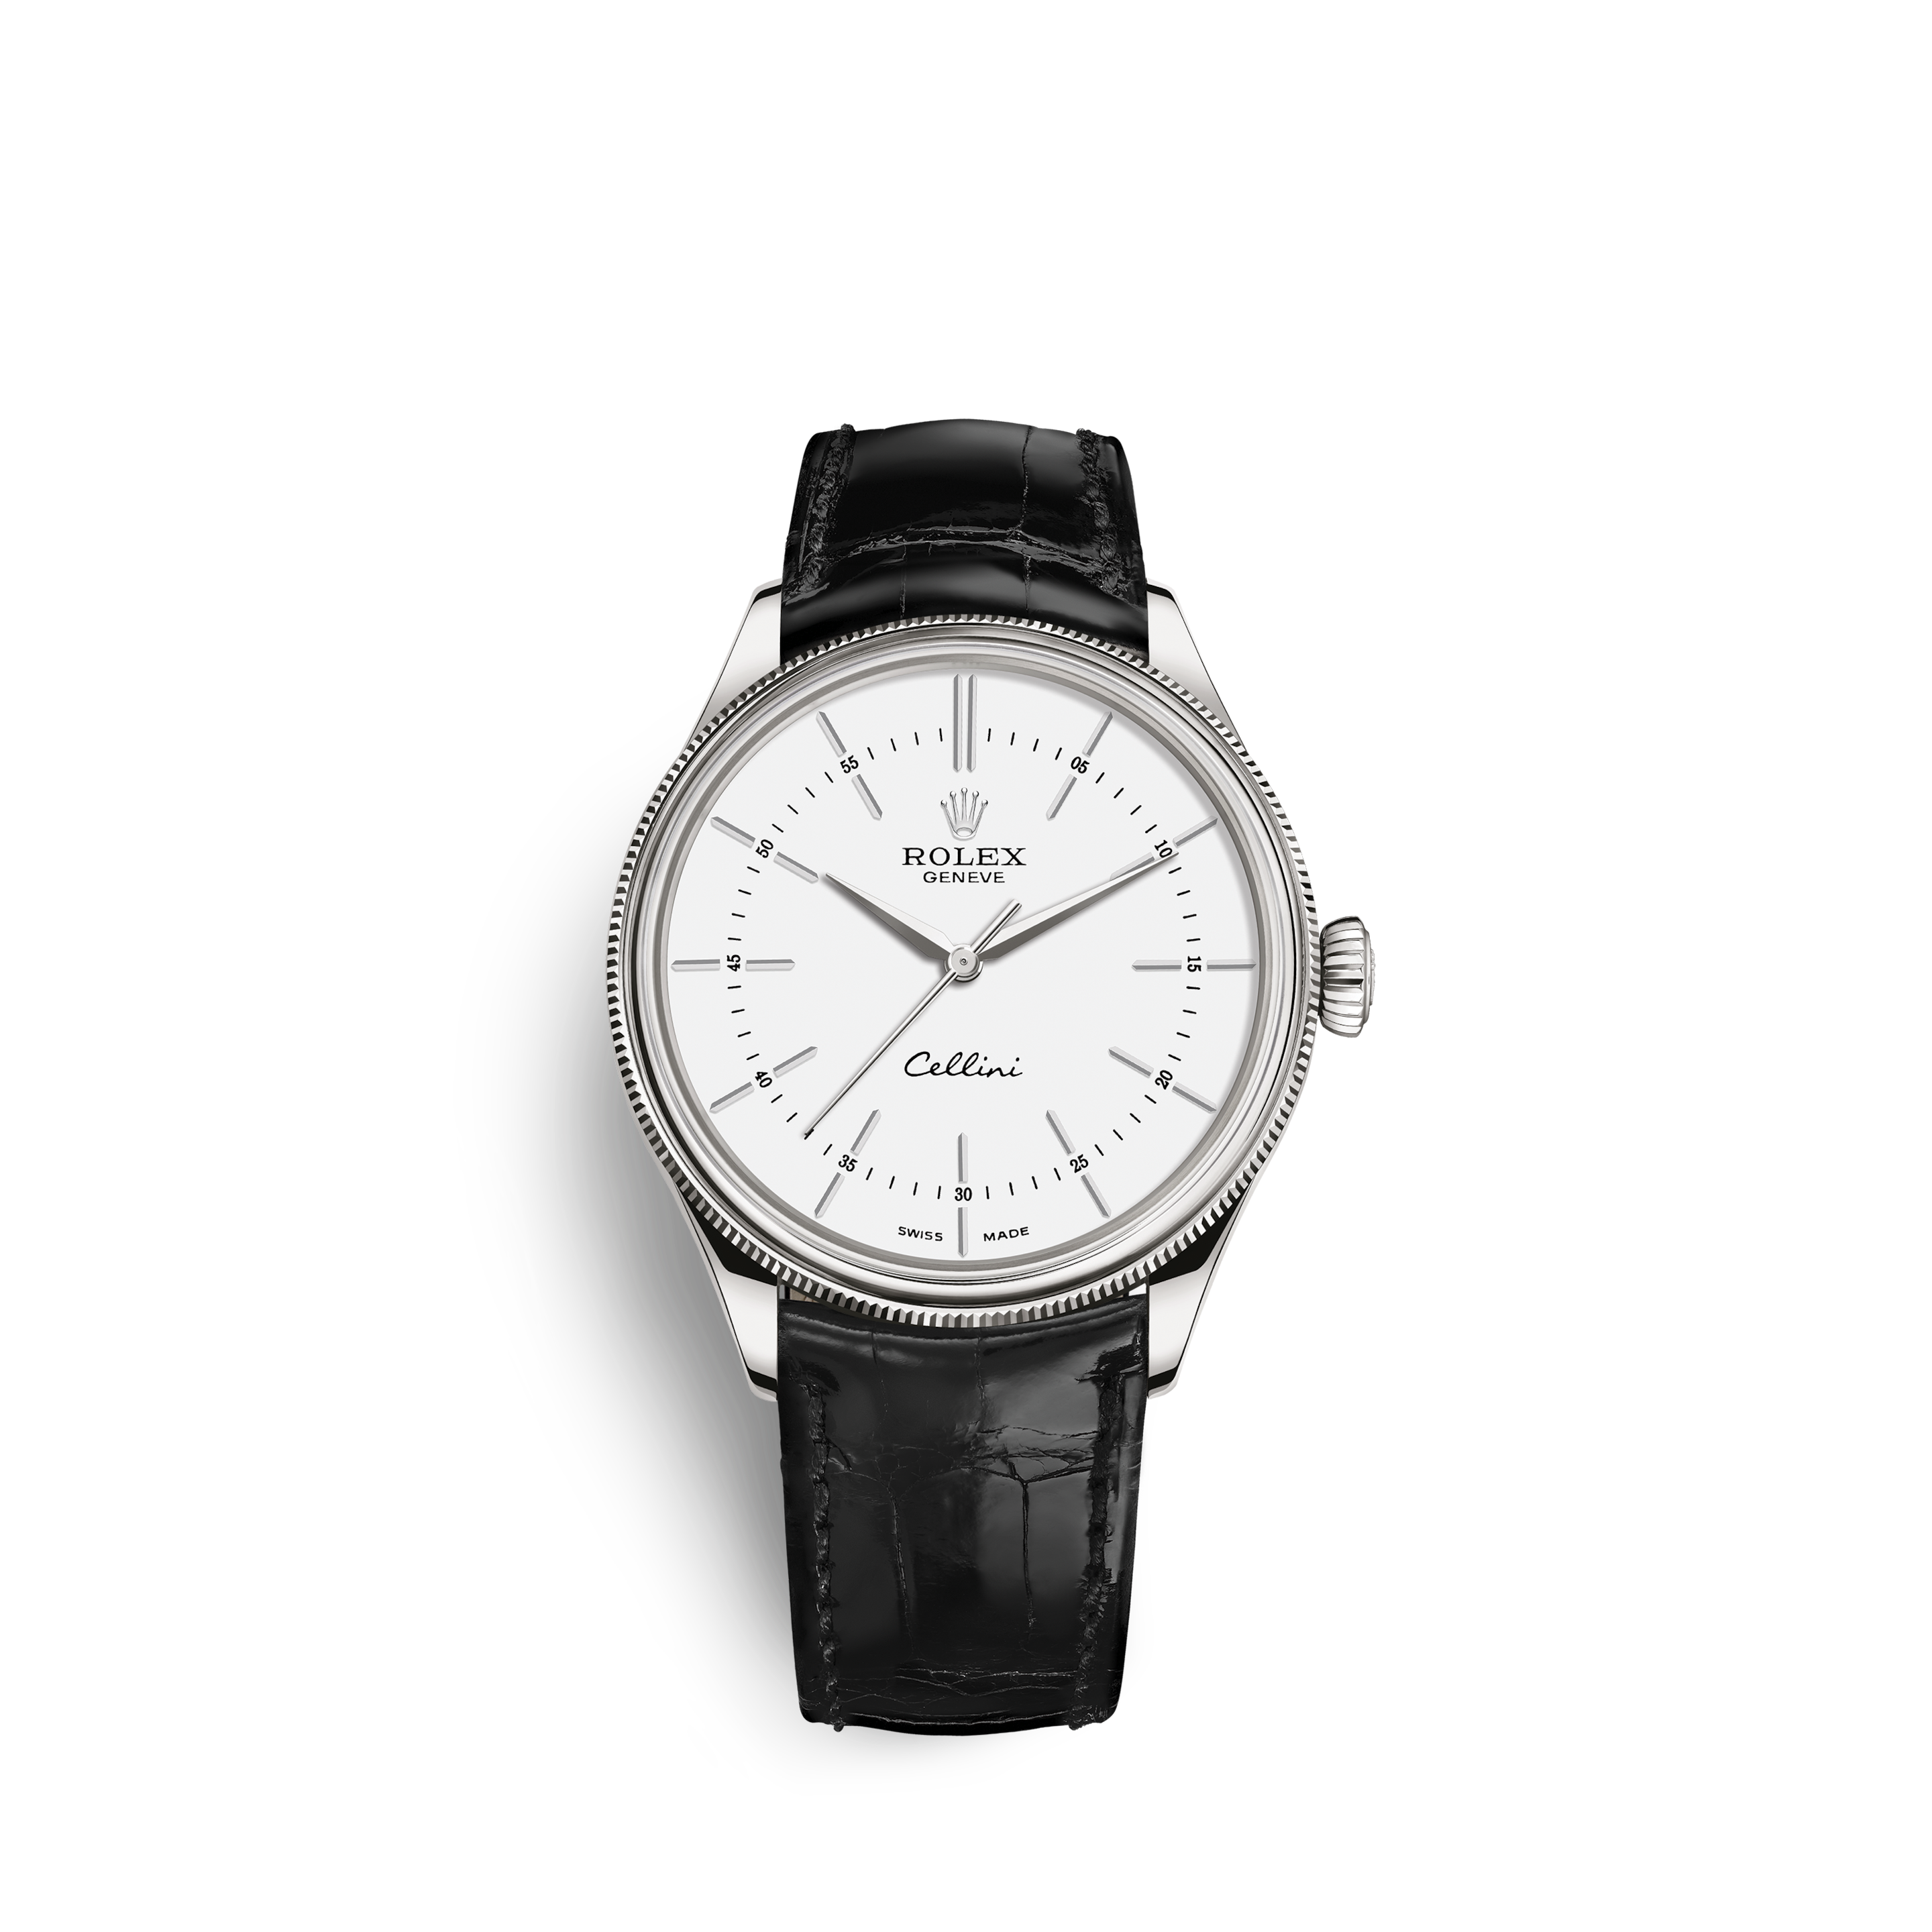 Rolex Cellini Dual Time Watch: 18 ct 